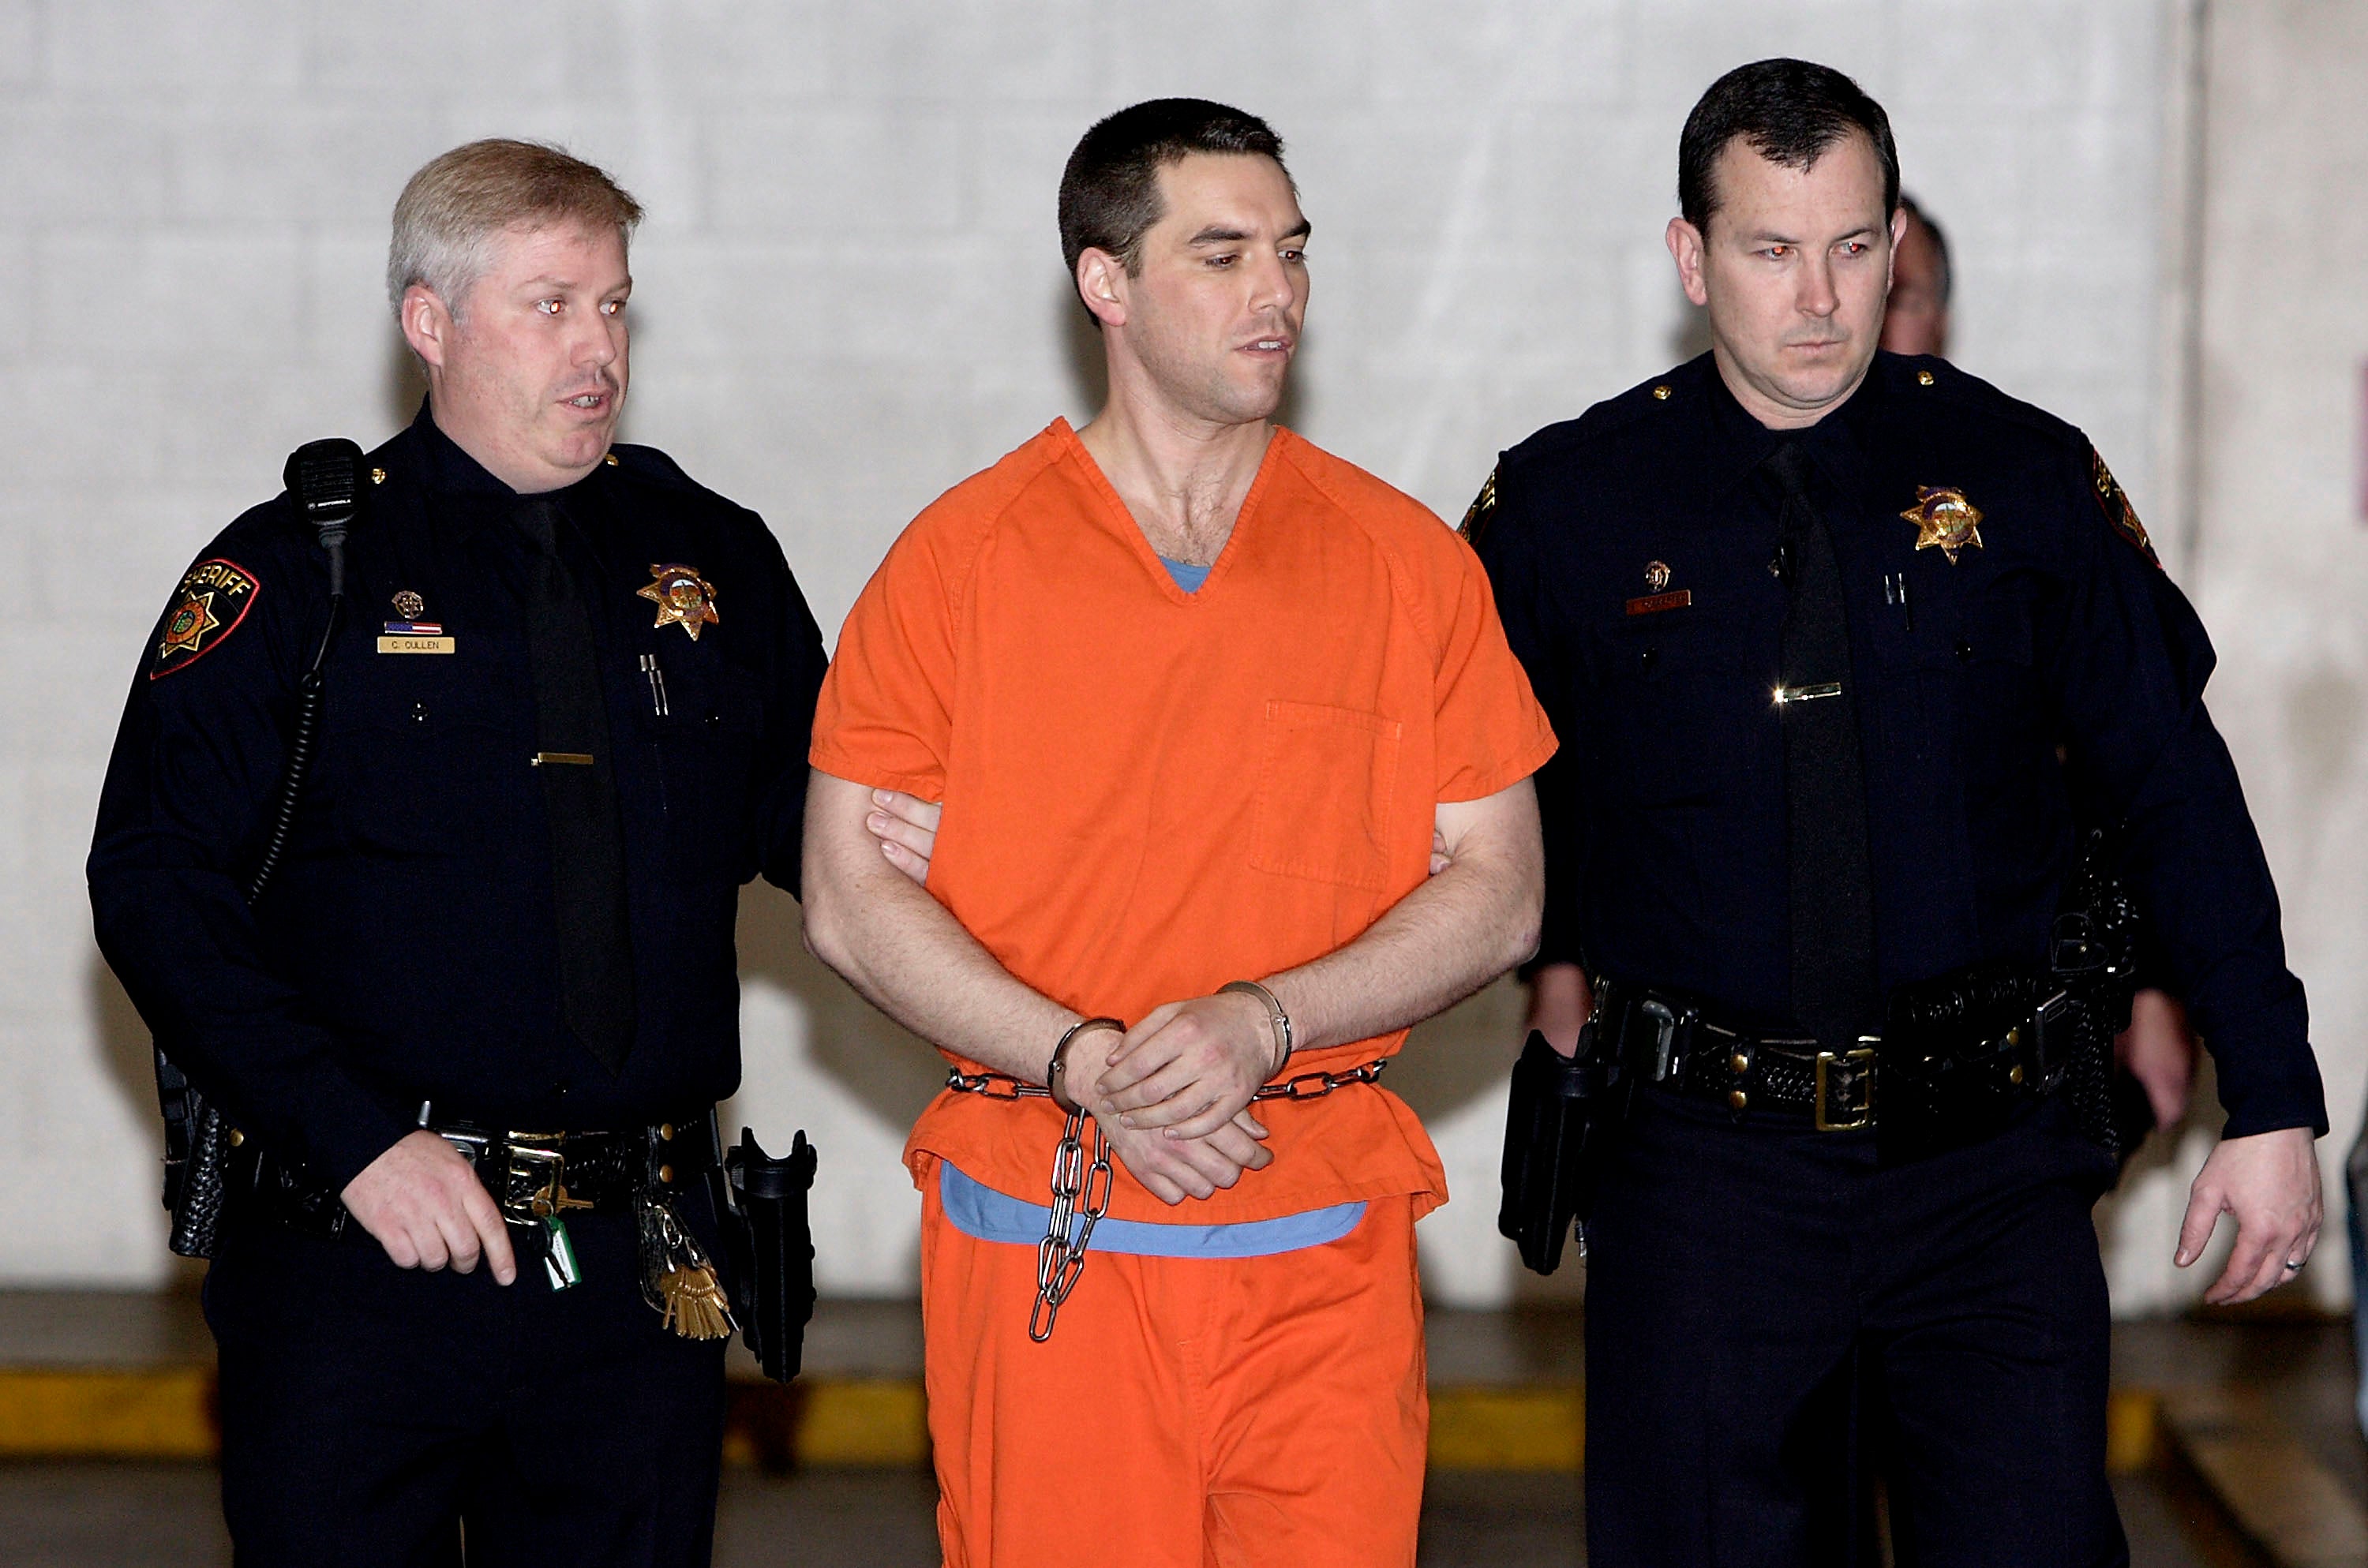 Scott Peterson, 21, was conviced in 2004 after being accused of murdering his wife and unborn son